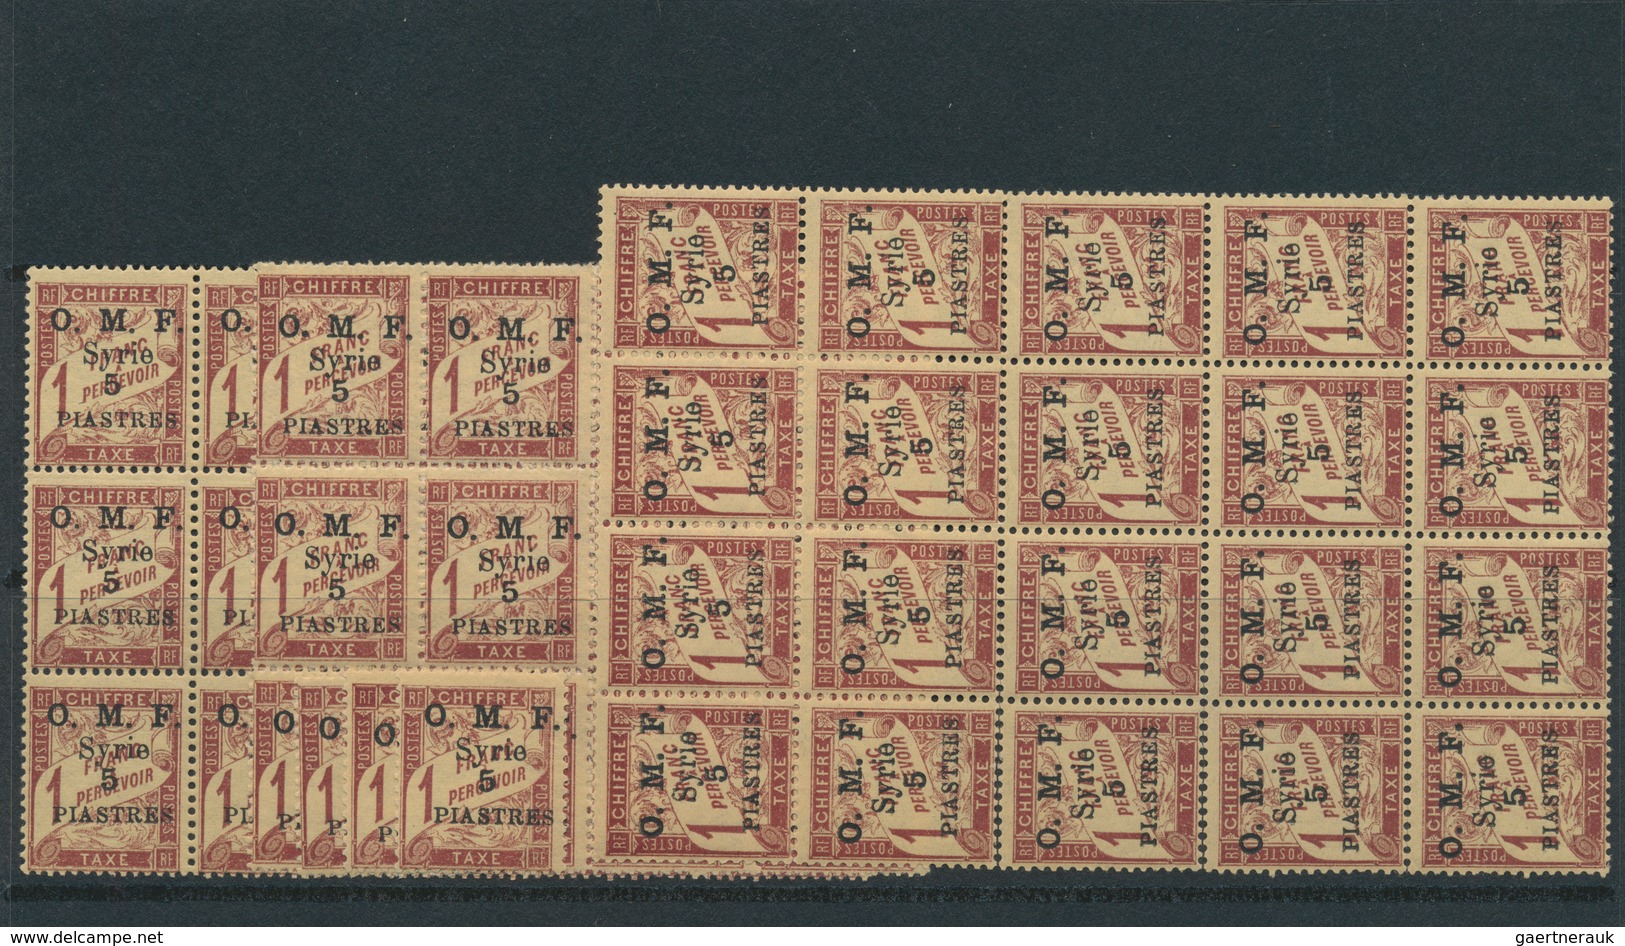 24224 Syrien - Portomarken: 1920/1924, u/m assortment of different issues, mainly (larger) units. Maury 7.